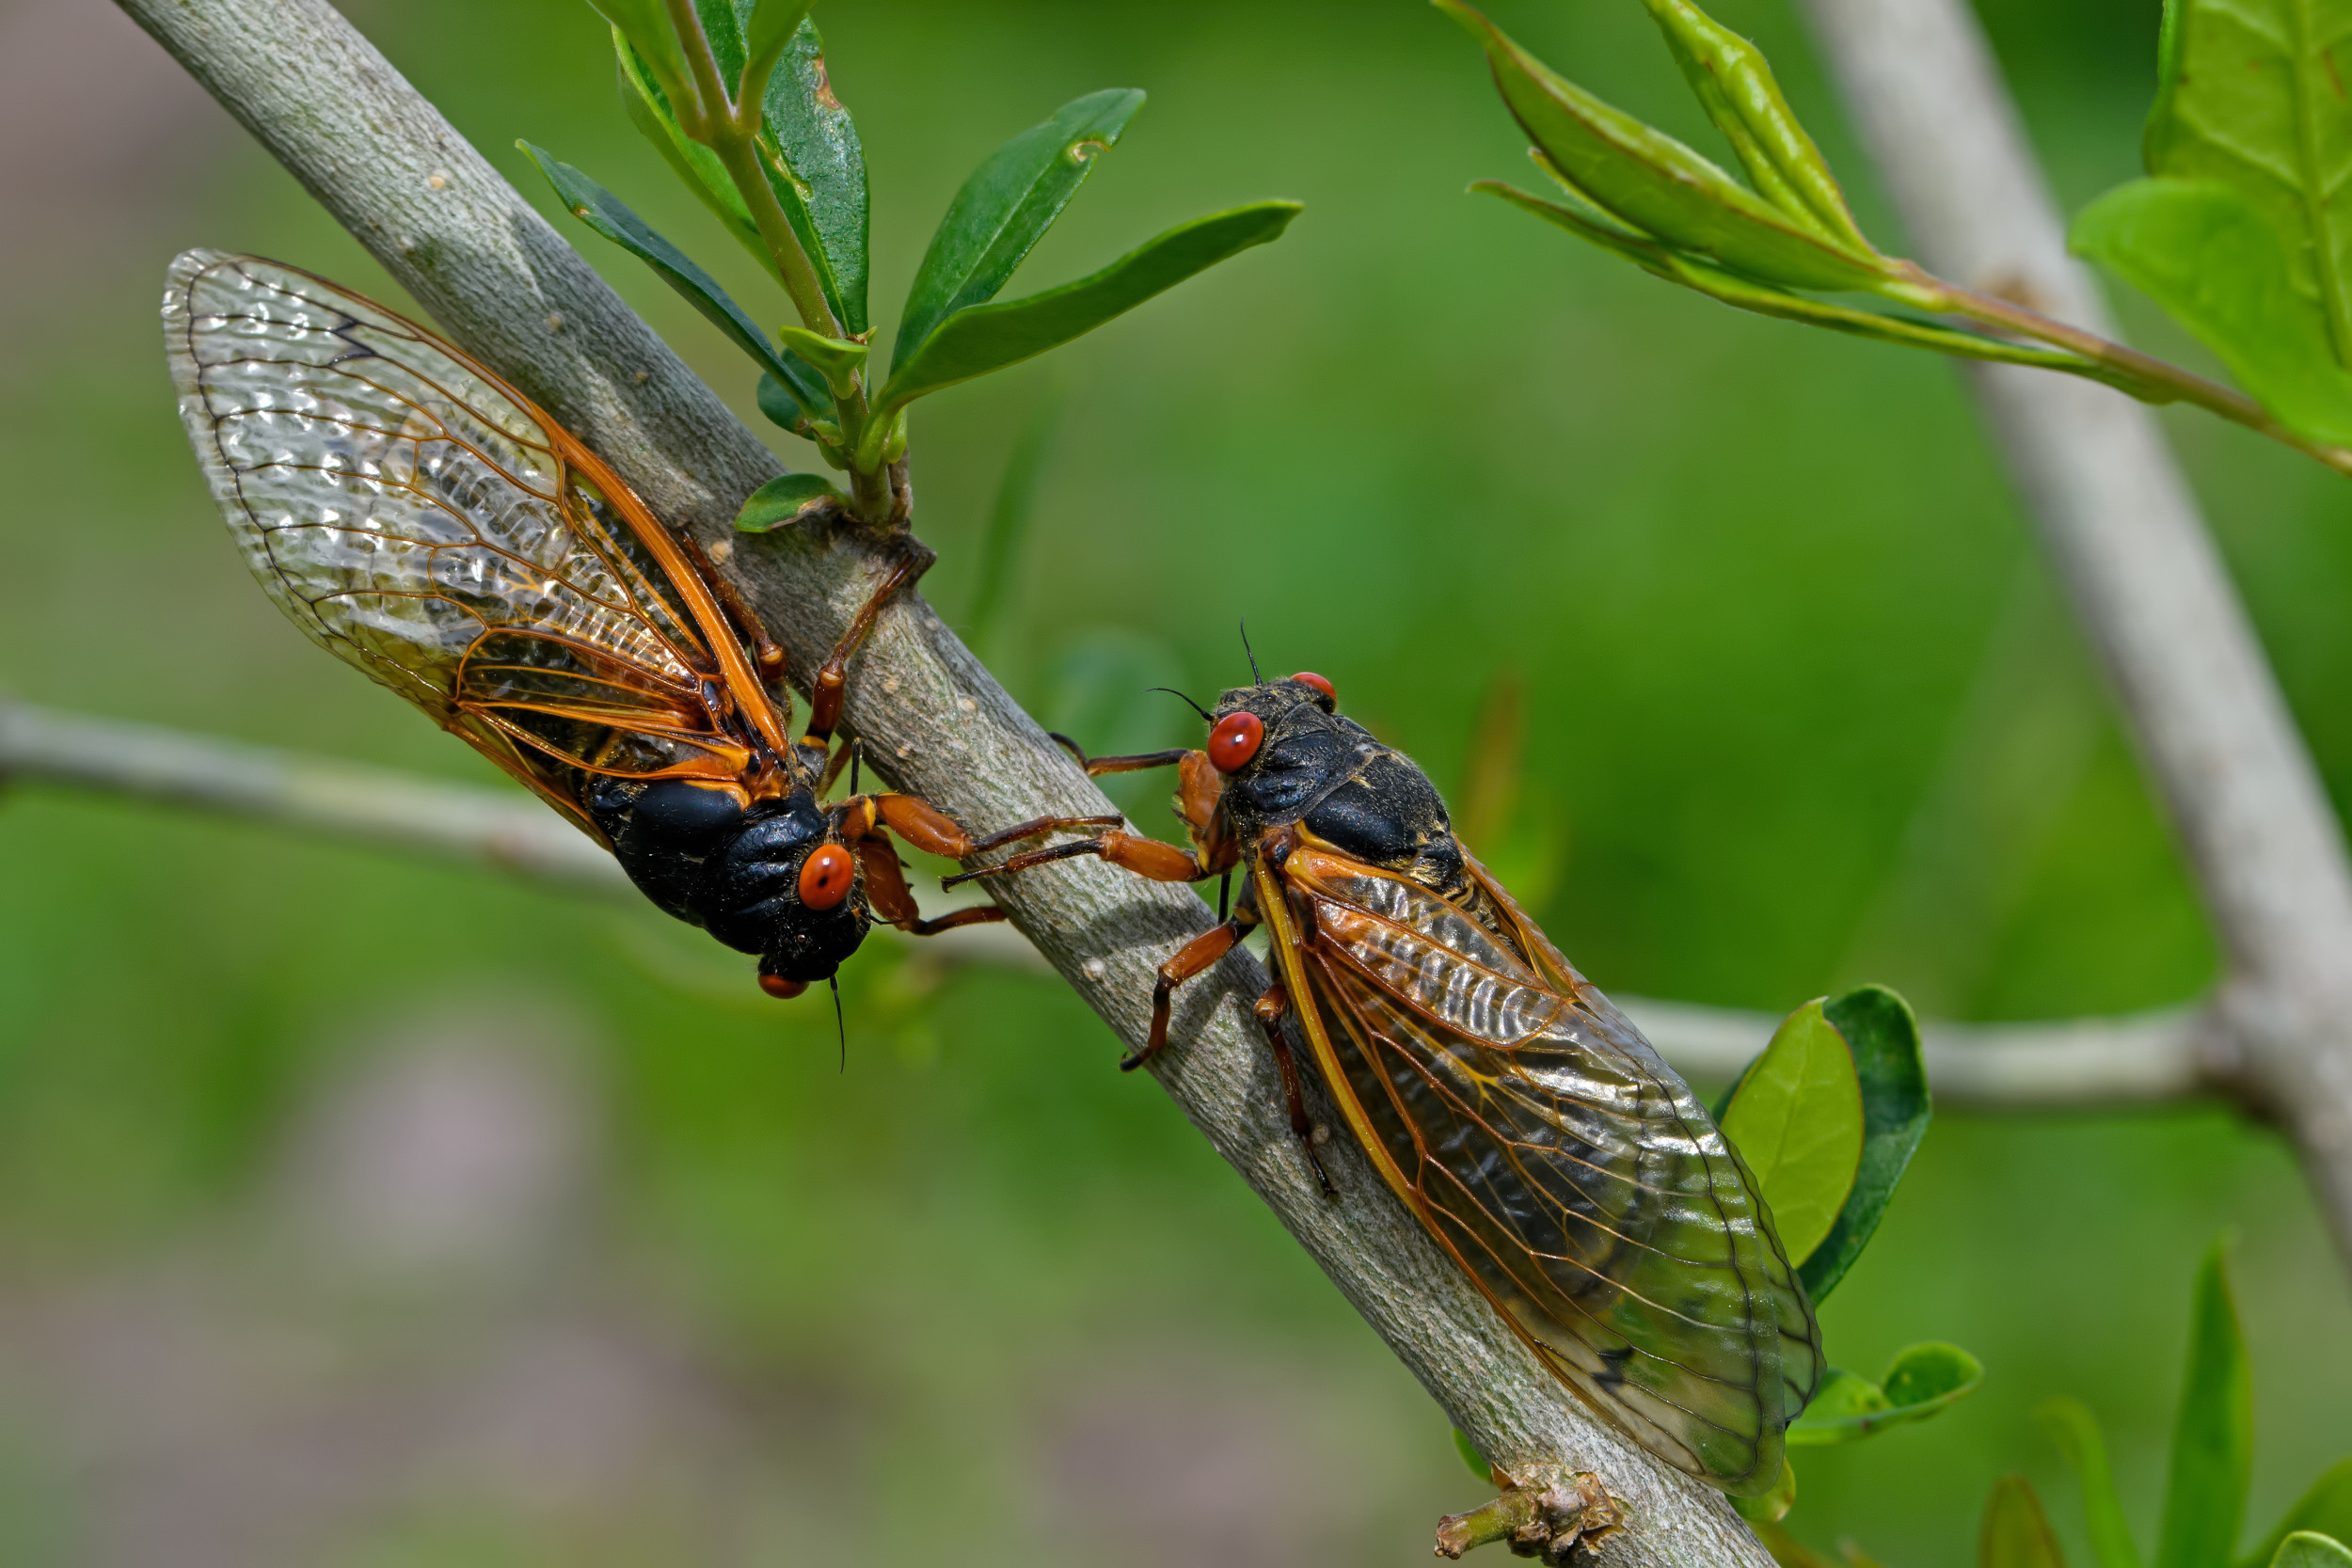 rare double cicada emergence not seen in 221 years